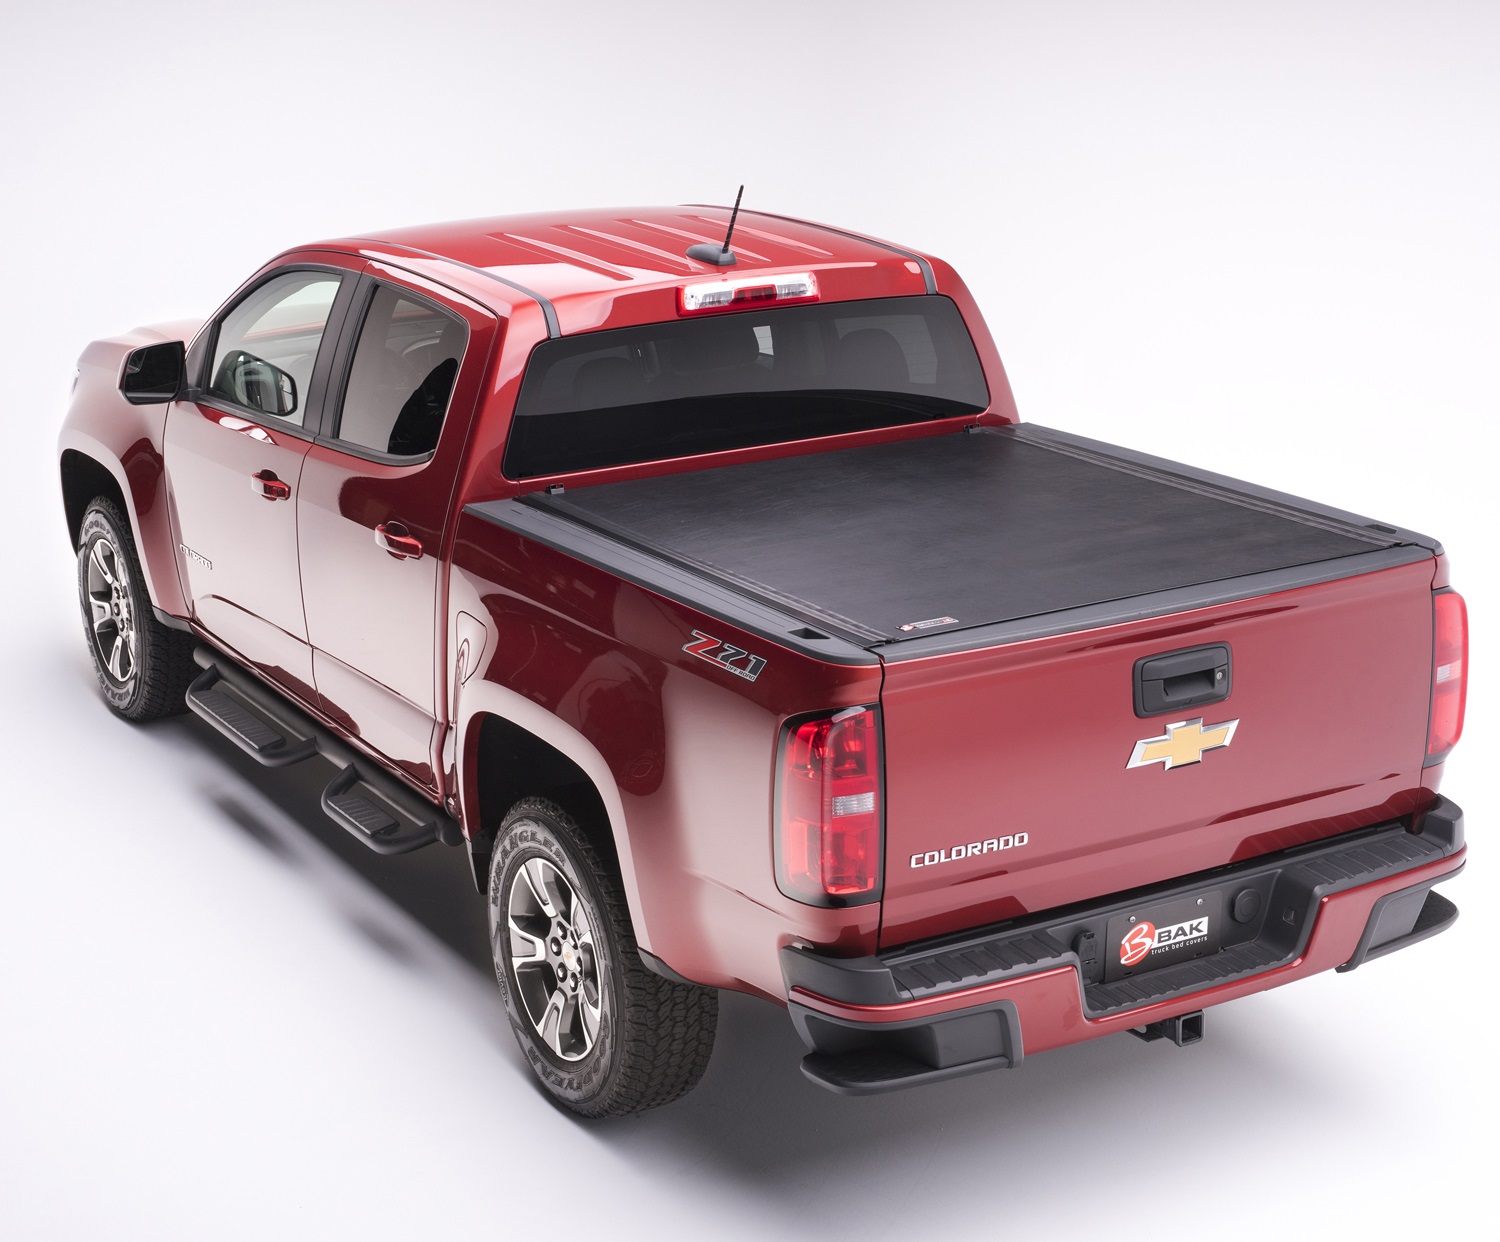 ... Industries 39125 Truck Bed Cover Fits 15 16 Canyon Colorado New | eBay